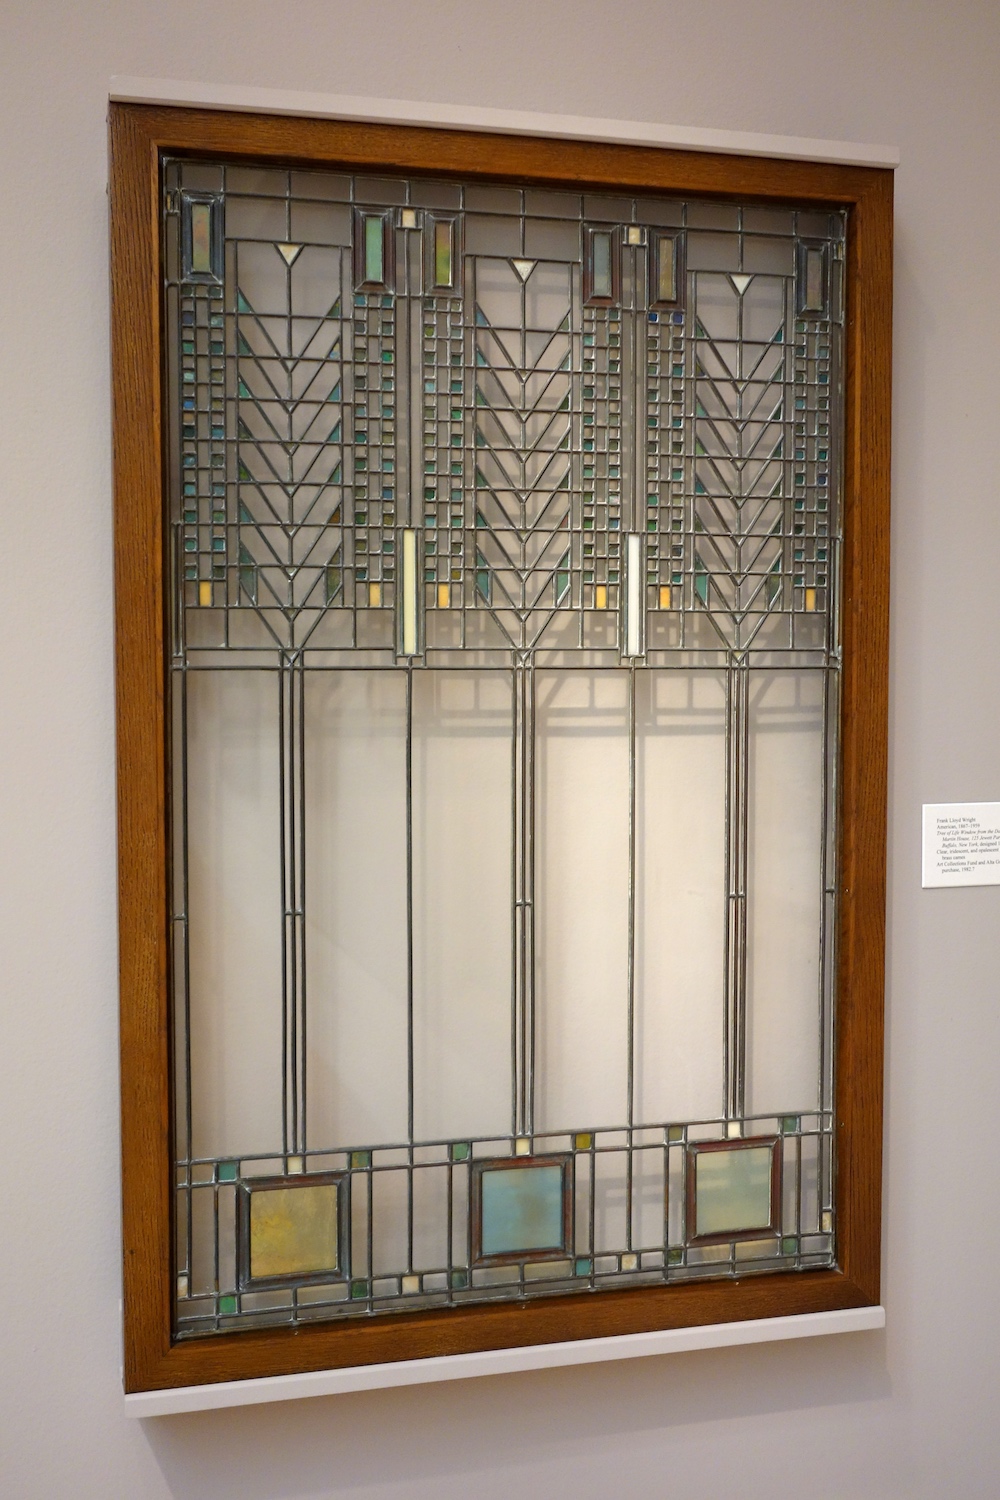 Frank Lloyd Wright designed window on display at the Chazen Museum of Art in Madison Wisconsin.